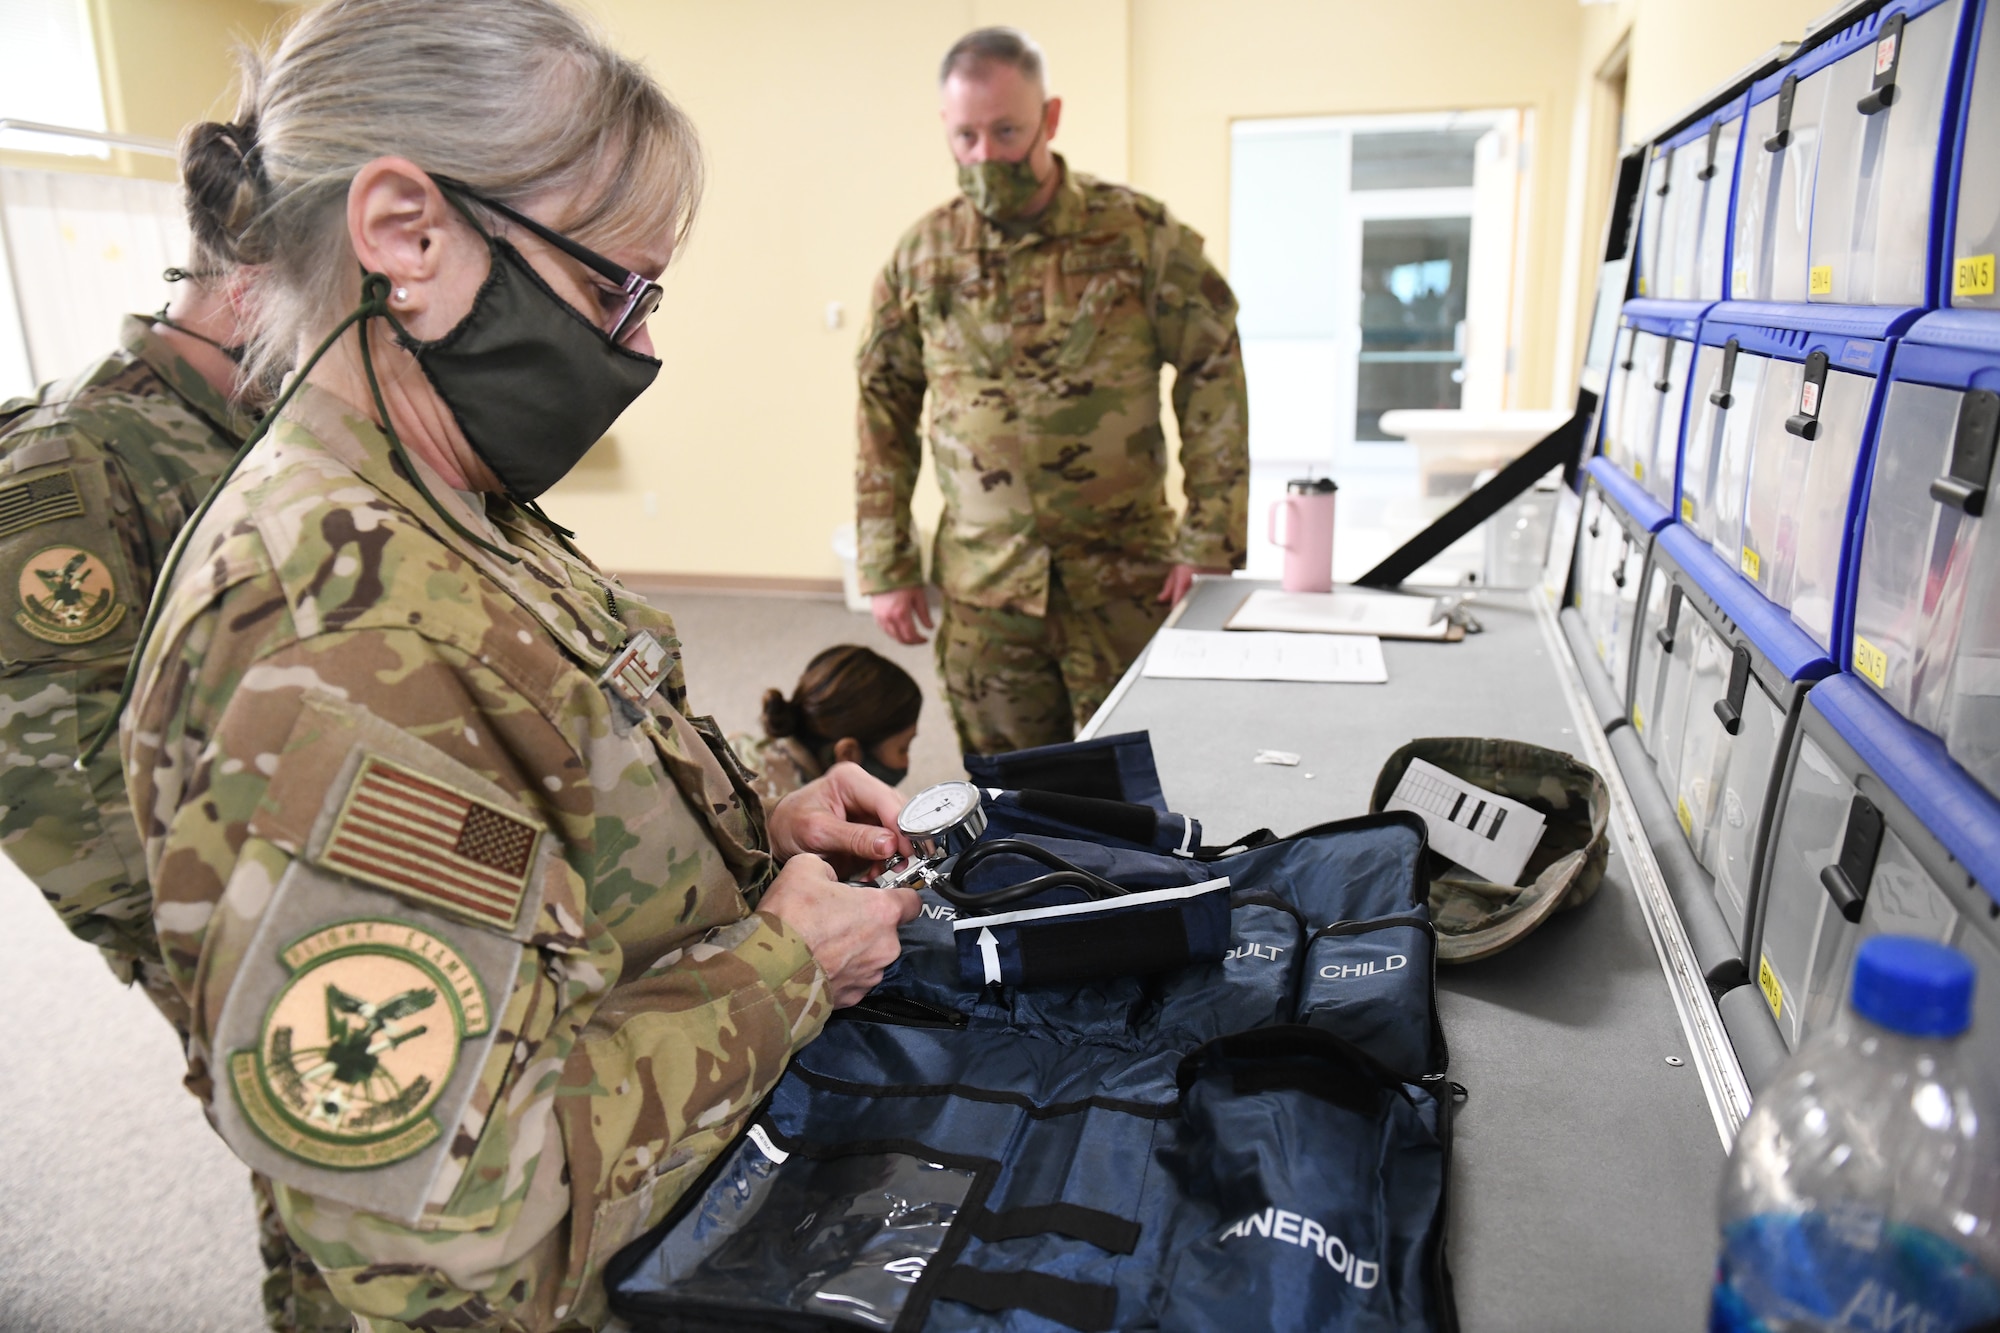 U.S. Air Force Lt. Col. Rachel Mallette, Chief Nurse with the 145th Aeromedical Evacuation Squadron conducts an inventory of medical supplies while conducting medical drills prior to accepting live patients, at the North Carolina National Guard Medical Support Shelter (MSS), Central North Carolina, April 29, 2020. The MSS is intended to act as an overflow shelter for hospital patients not infected with the COVID-19 virus and is maned by a joint task force of Army and Airforce National Guard medical staff.